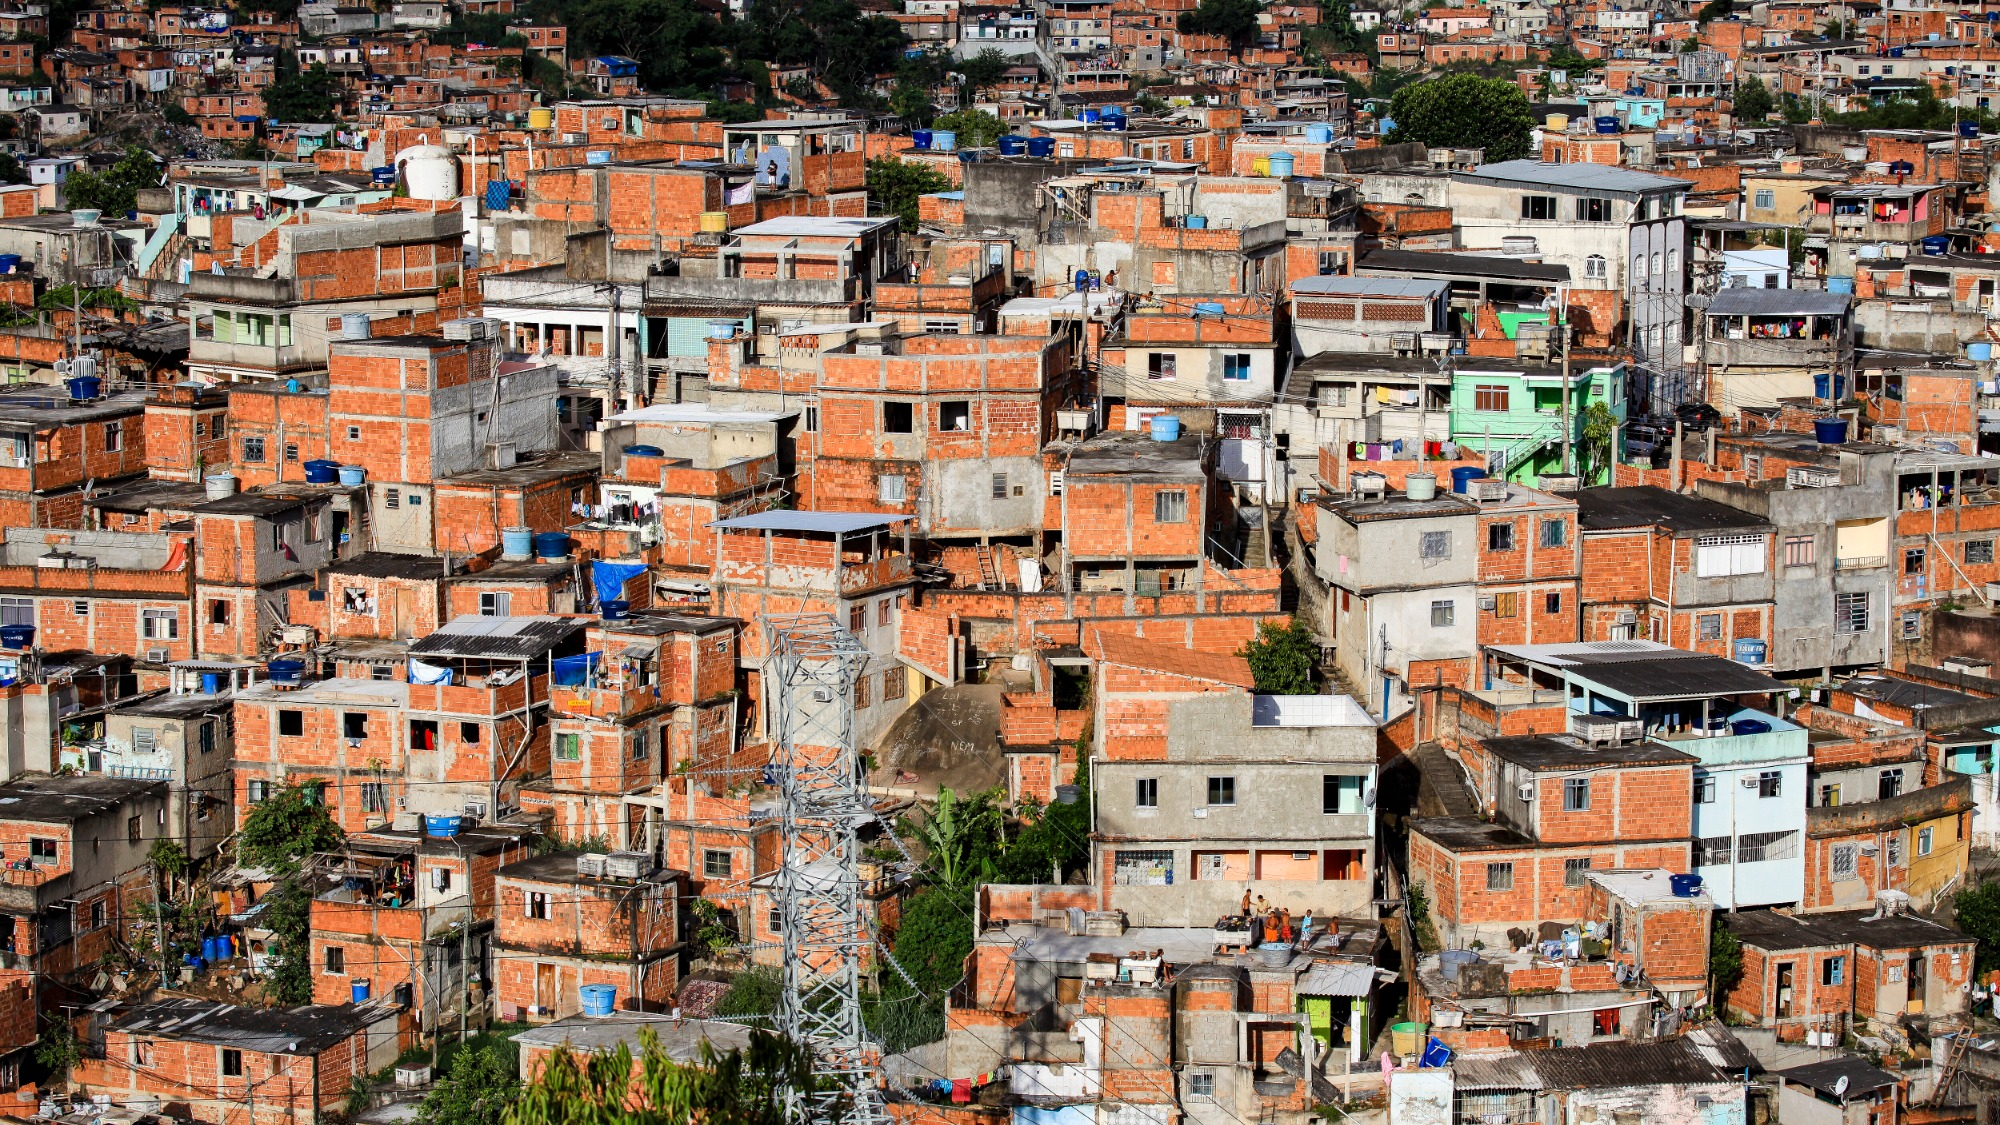 Plant-covered roofs could help chill Brazil’s heat-stricken favelas